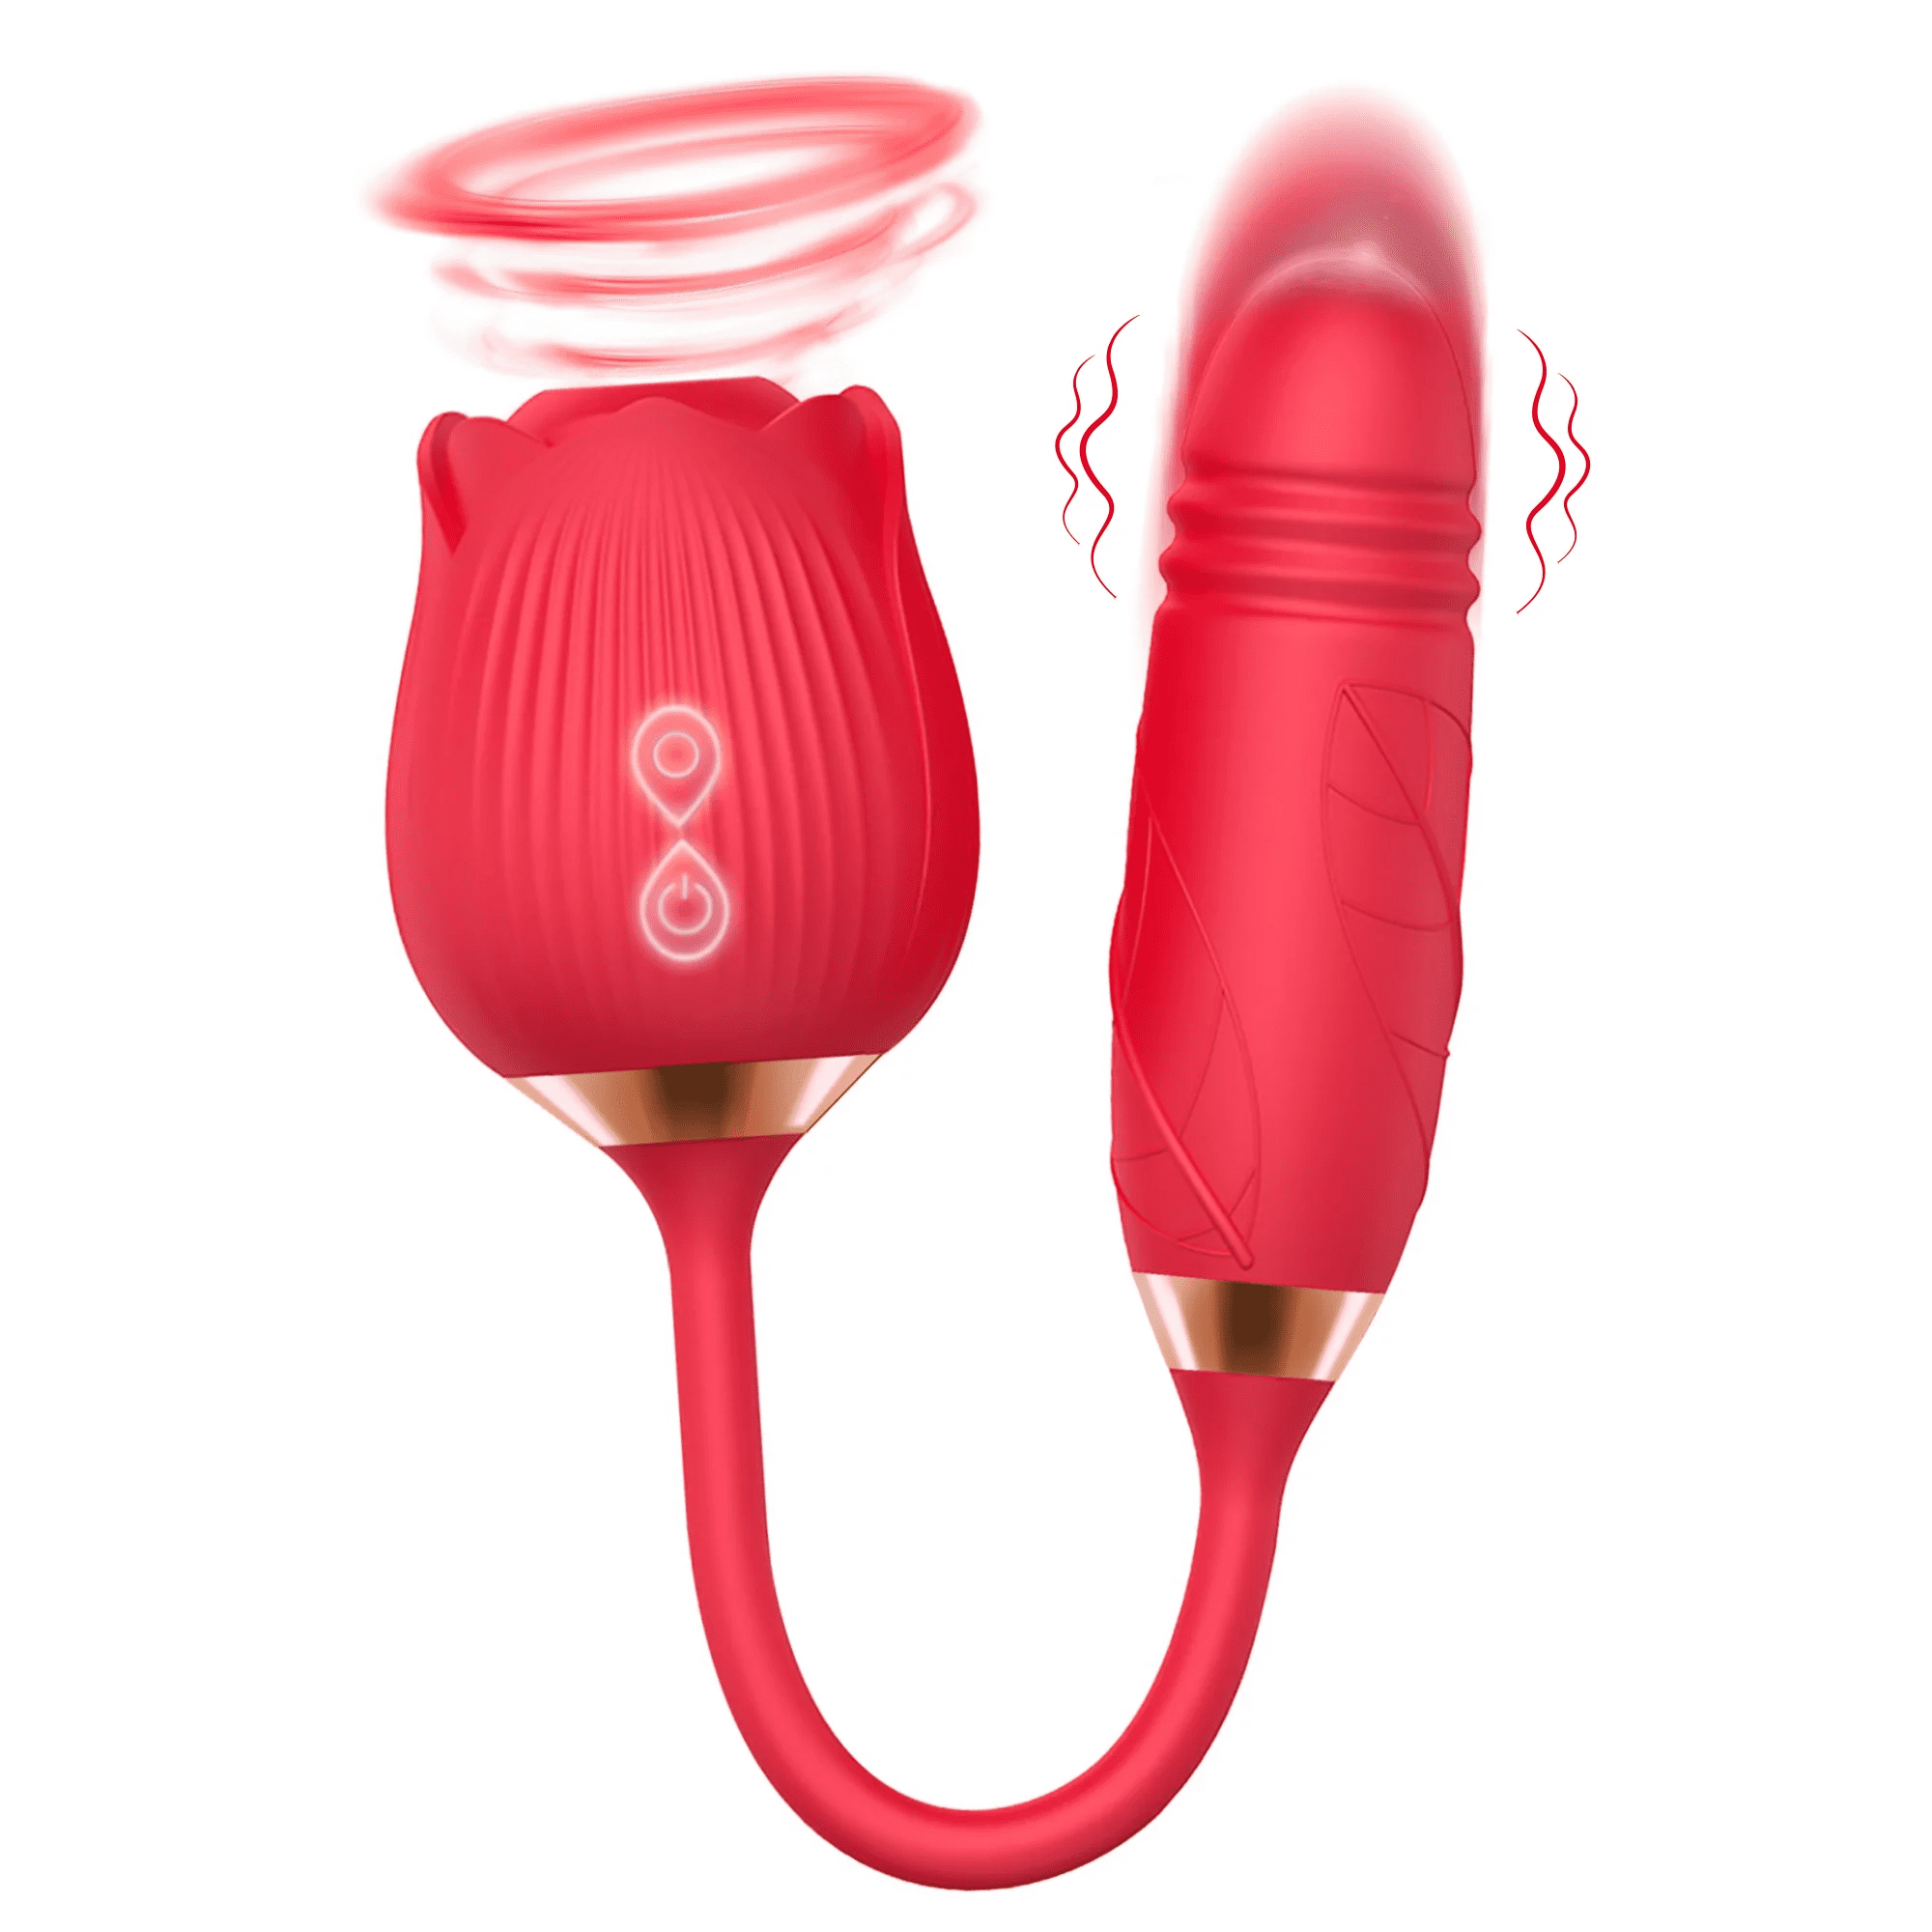 Rose Toy For Women Vibrator And Toys With 10 Vibrating, Gifts For Women  High Quality